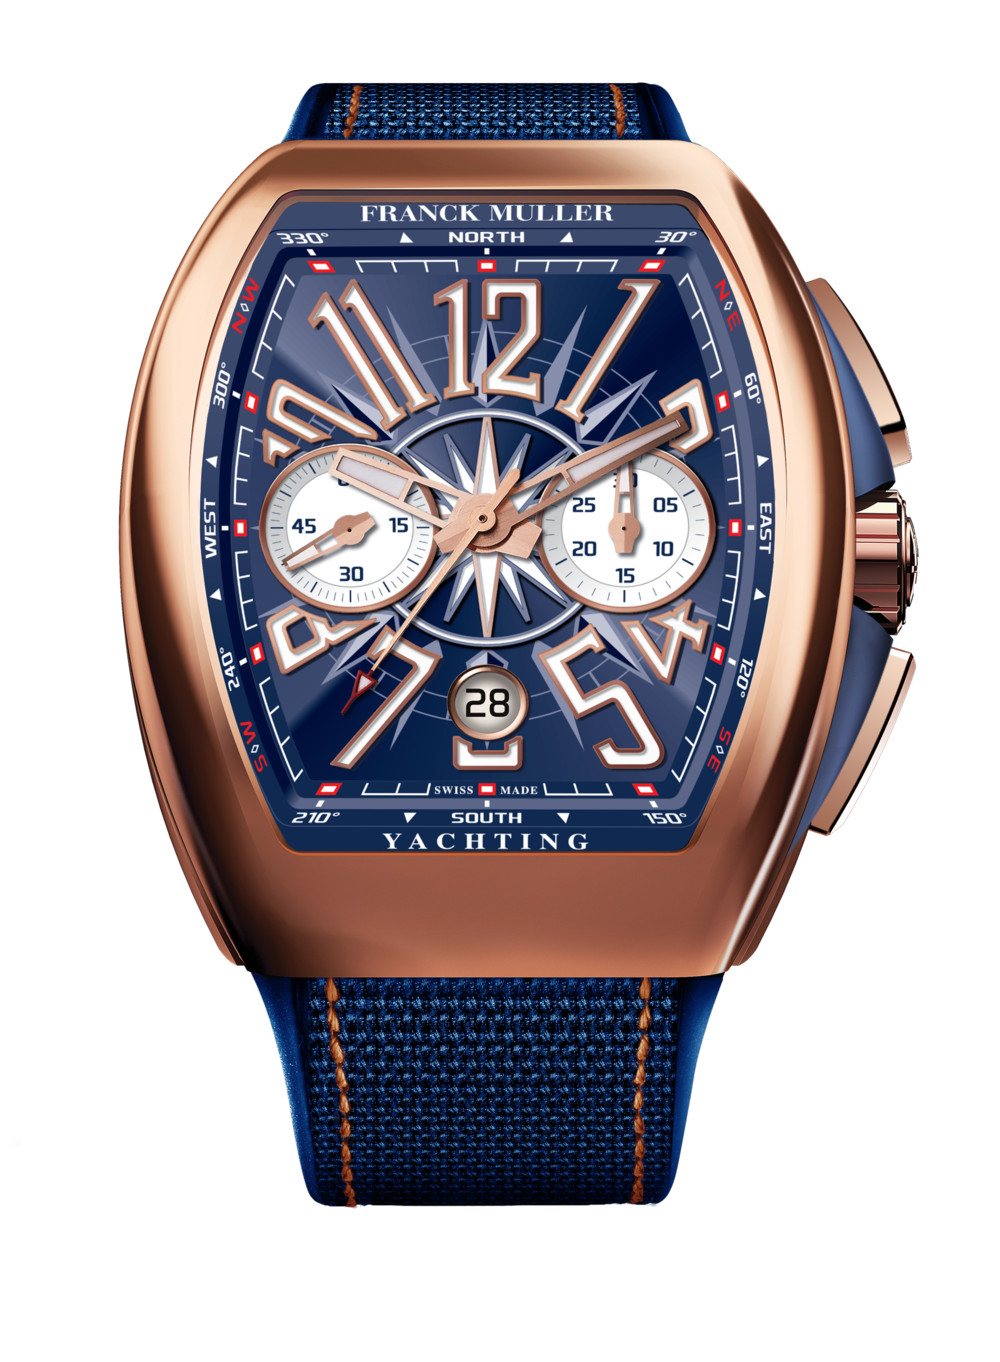 Franck Muller Long Island Color DreamsFranck Muller Yachting Automatic Blue Dial Men's Sc Dt Ac Yacht